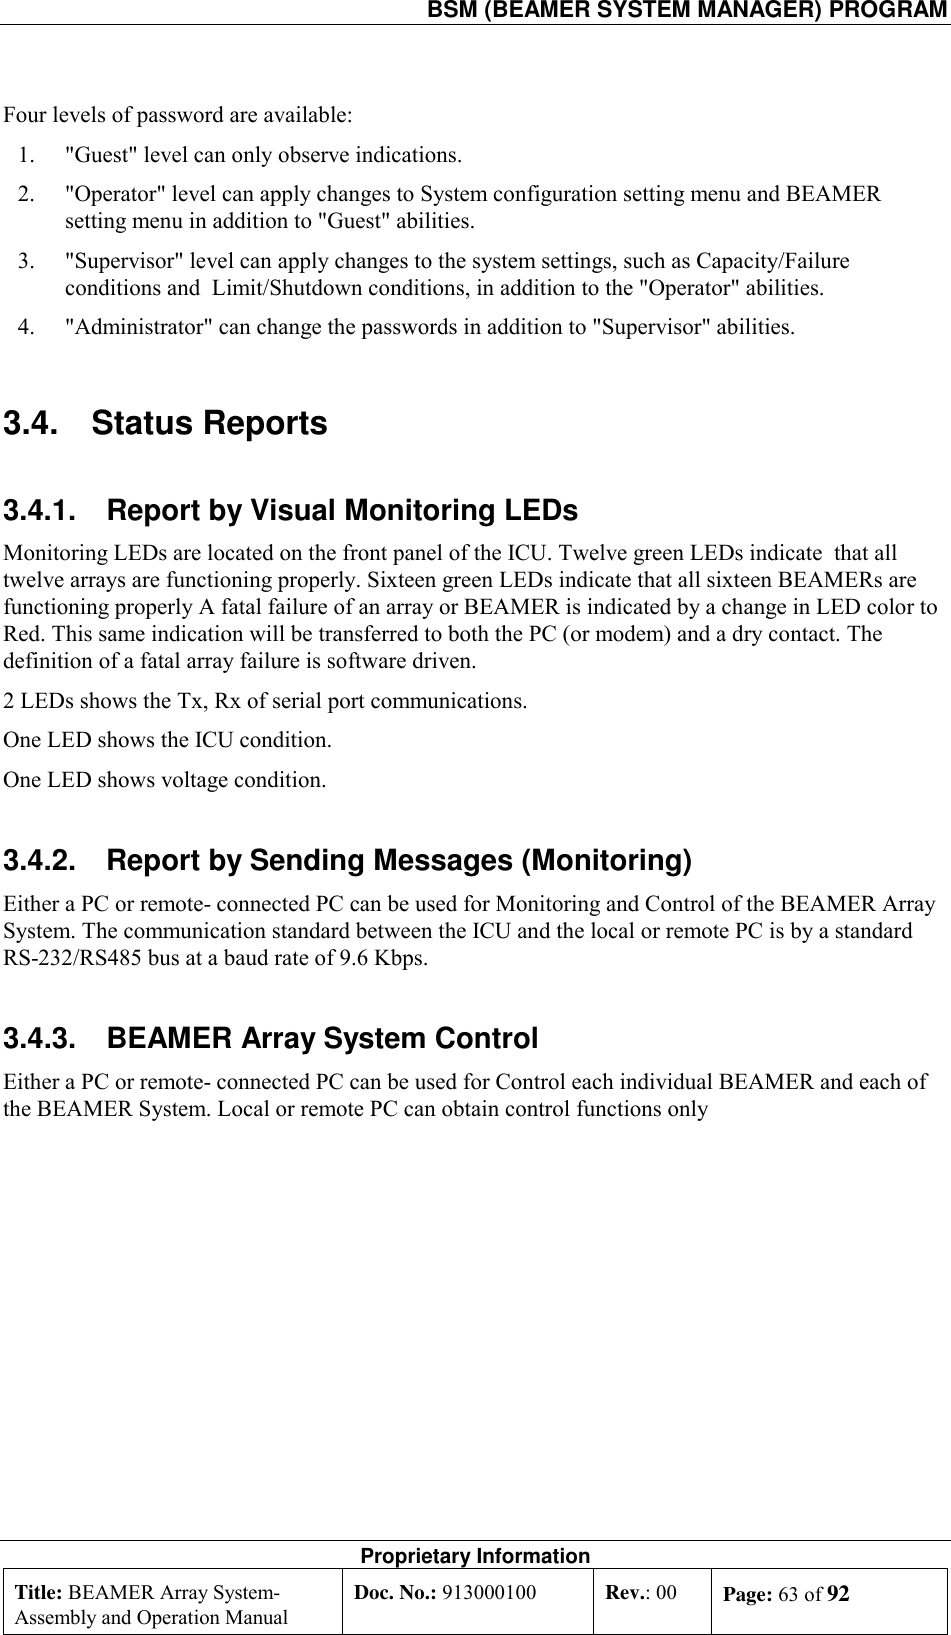   BSM (BEAMER SYSTEM MANAGER) PROGRAM Proprietary Information Title: BEAMER Array System- Assembly and Operation Manual Doc. No.: 913000100  Rev.: 00  Page: 63 of 92  Four levels of password are available: 1.  &quot;Guest&quot; level can only observe indications. 2.  &quot;Operator&quot; level can apply changes to System configuration setting menu and BEAMER setting menu in addition to &quot;Guest&quot; abilities.  3.  &quot;Supervisor&quot; level can apply changes to the system settings, such as Capacity/Failure conditions and  Limit/Shutdown conditions, in addition to the &quot;Operator&quot; abilities. 4.  &quot;Administrator&quot; can change the passwords in addition to &quot;Supervisor&quot; abilities.    3.4. Status Reports 3.4.1.  Report by Visual Monitoring LEDs Monitoring LEDs are located on the front panel of the ICU. Twelve green LEDs indicate  that all twelve arrays are functioning properly. Sixteen green LEDs indicate that all sixteen BEAMERs are functioning properly A fatal failure of an array or BEAMER is indicated by a change in LED color to Red. This same indication will be transferred to both the PC (or modem) and a dry contact. The definition of a fatal array failure is software driven. 2 LEDs shows the Tx, Rx of serial port communications. One LED shows the ICU condition. One LED shows voltage condition. 3.4.2.  Report by Sending Messages (Monitoring)  Either a PC or remote- connected PC can be used for Monitoring and Control of the BEAMER Array System. The communication standard between the ICU and the local or remote PC is by a standard RS-232/RS485 bus at a baud rate of 9.6 Kbps. 3.4.3.  BEAMER Array System Control Either a PC or remote- connected PC can be used for Control each individual BEAMER and each of the BEAMER System. Local or remote PC can obtain control functions only 